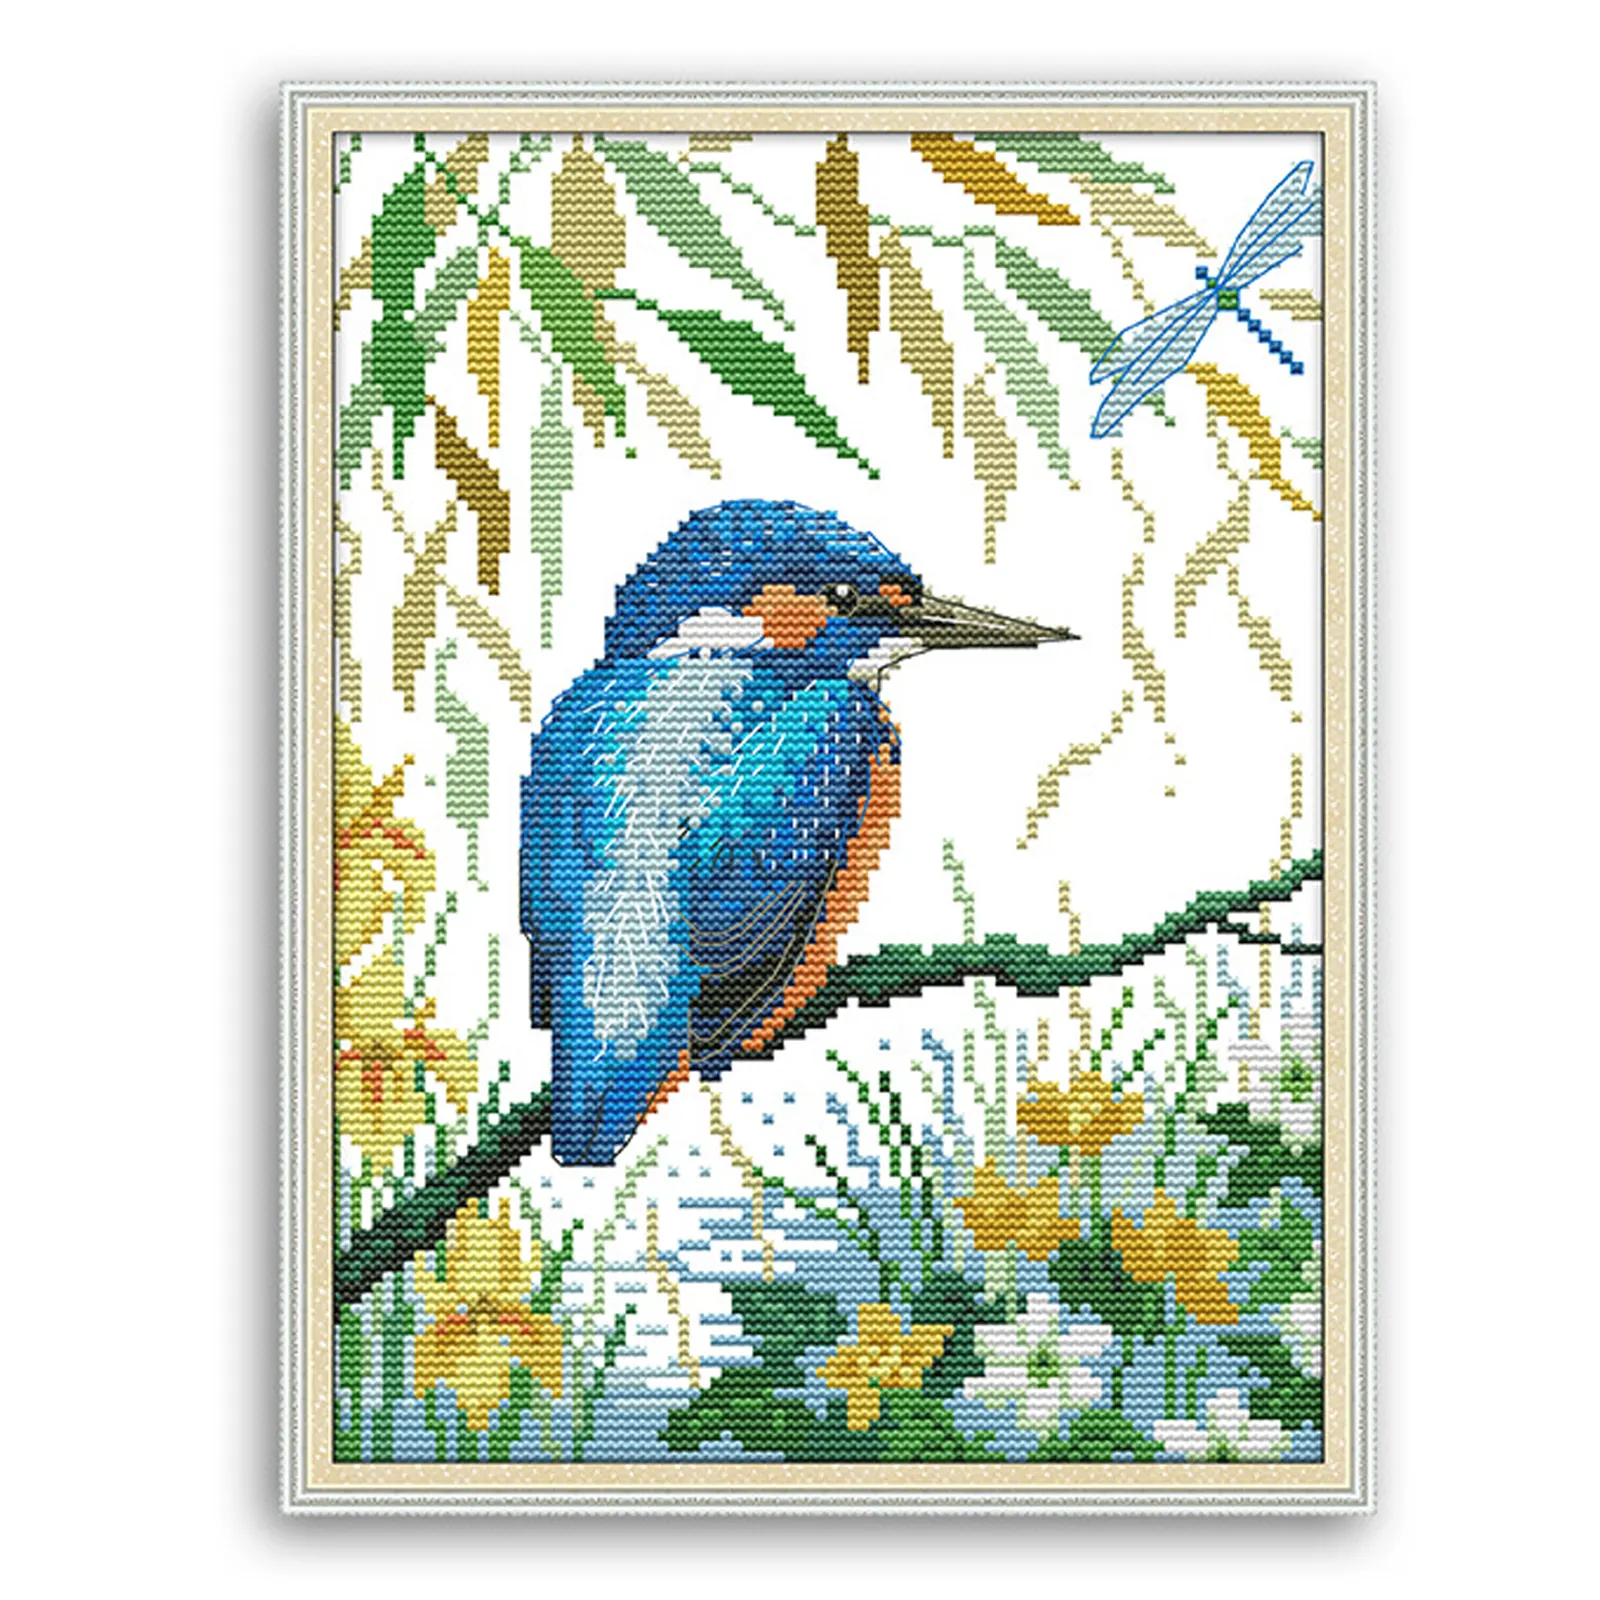 Landscape Painting Boutique Count Embroidery Kit Cotton Thread Bird Cross Stitch Bedroom Wall Art Picture Diy Crafts Adult